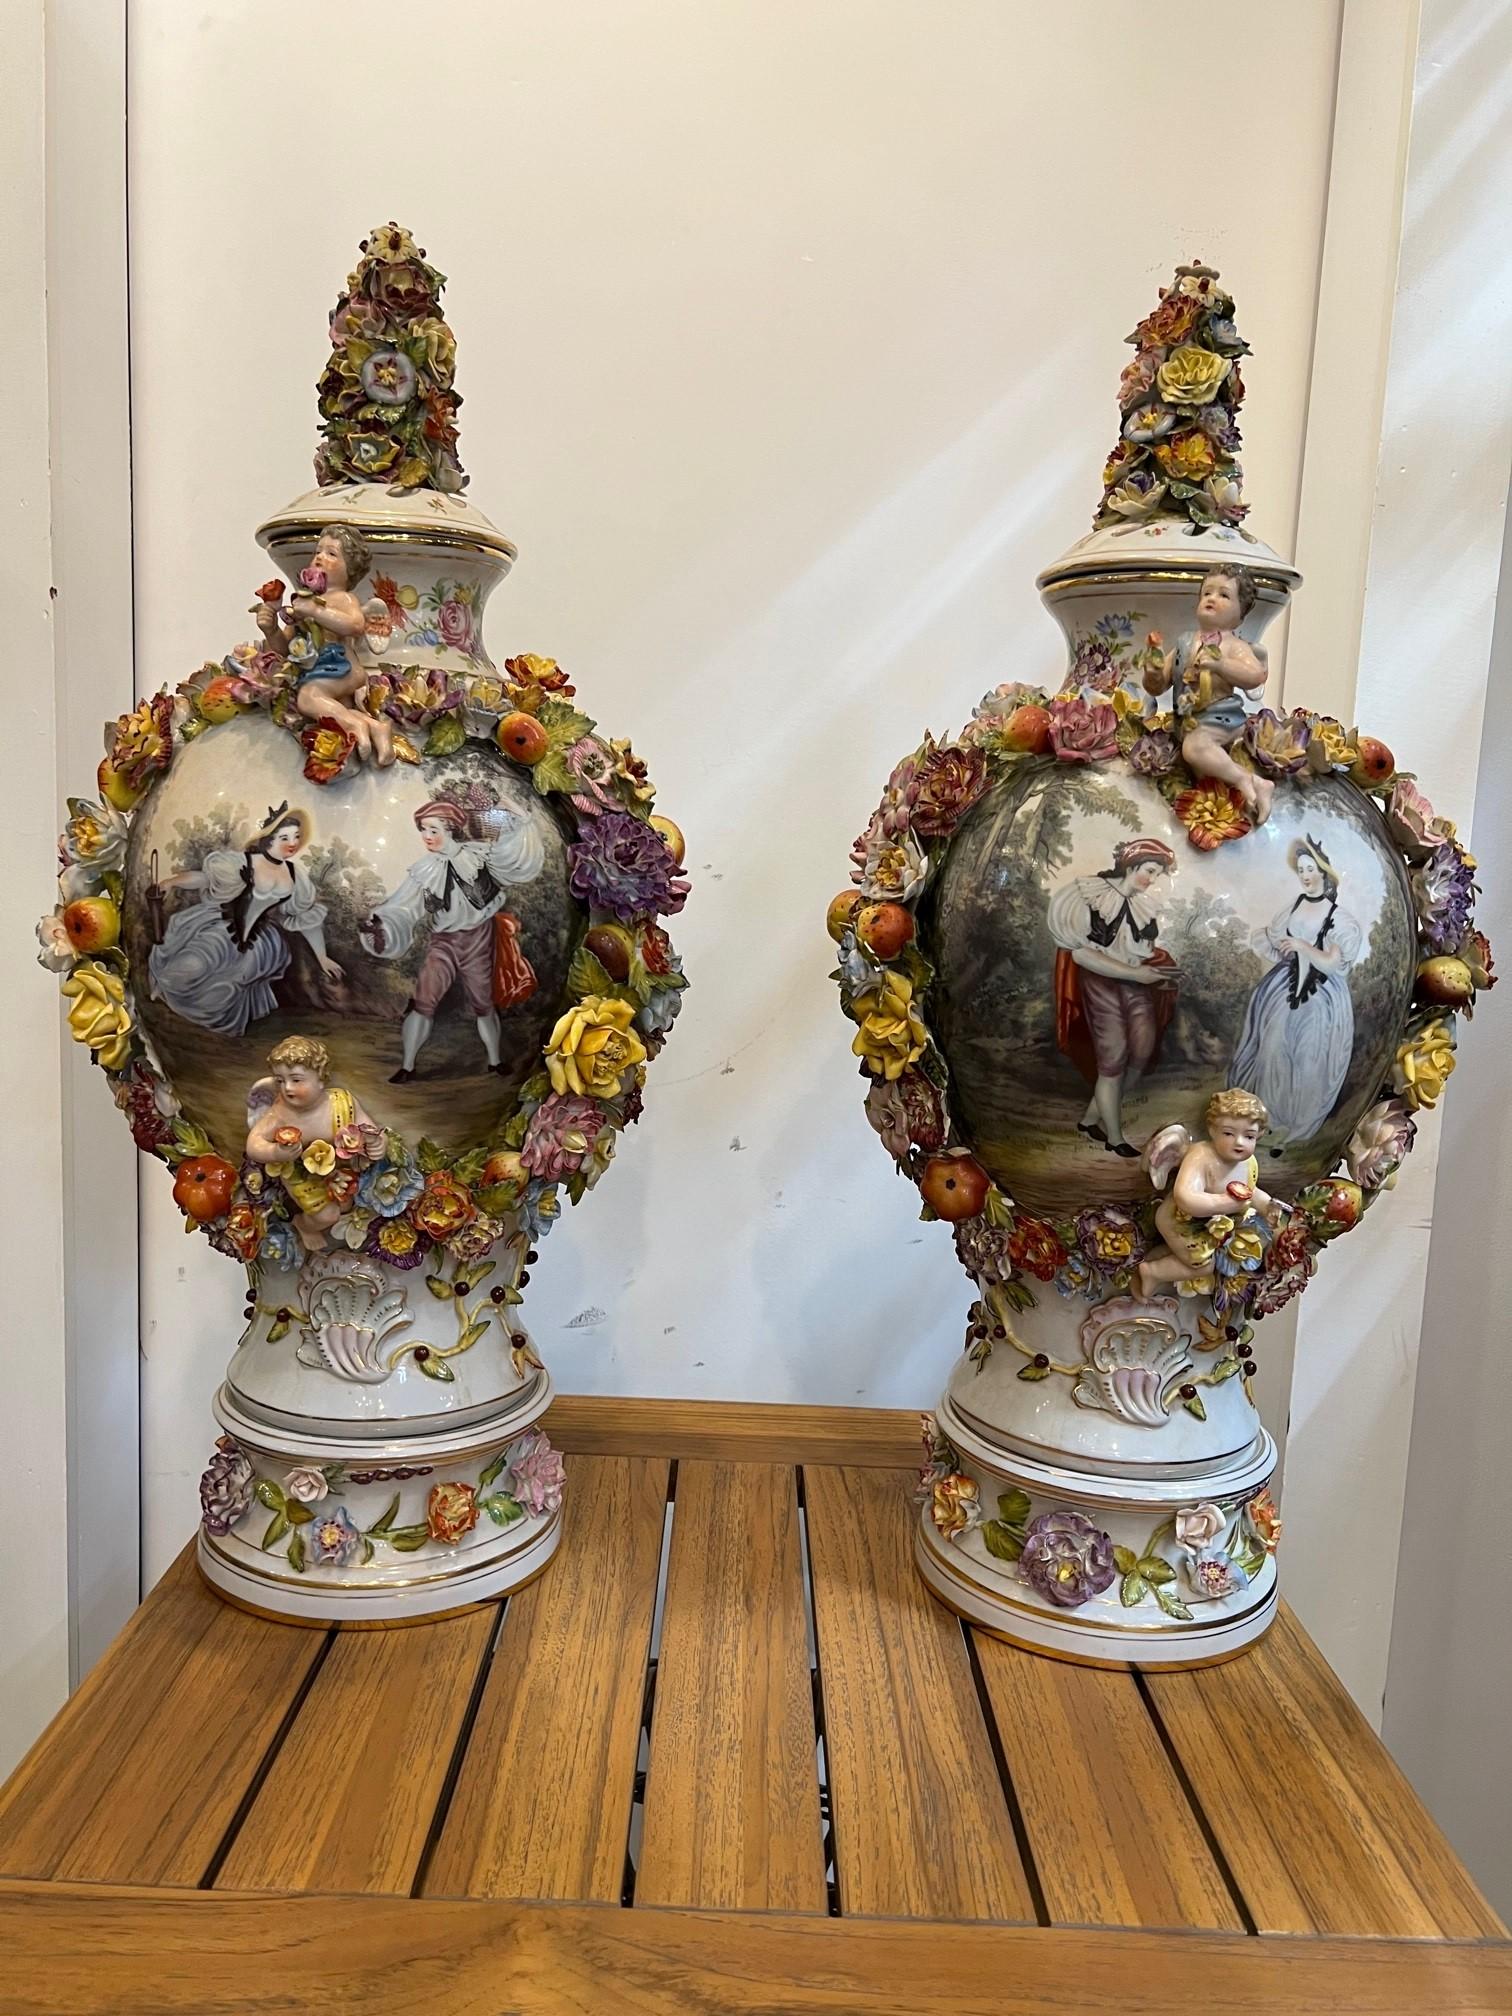 A beautiful pair of Dresden style hand painted porcelain urns with lids. A very impressive and decorative pair of Dresden style lidded porcelain urns. Classical romantic hand painted scenes with  pierced lids on a raised round pedestal base. The